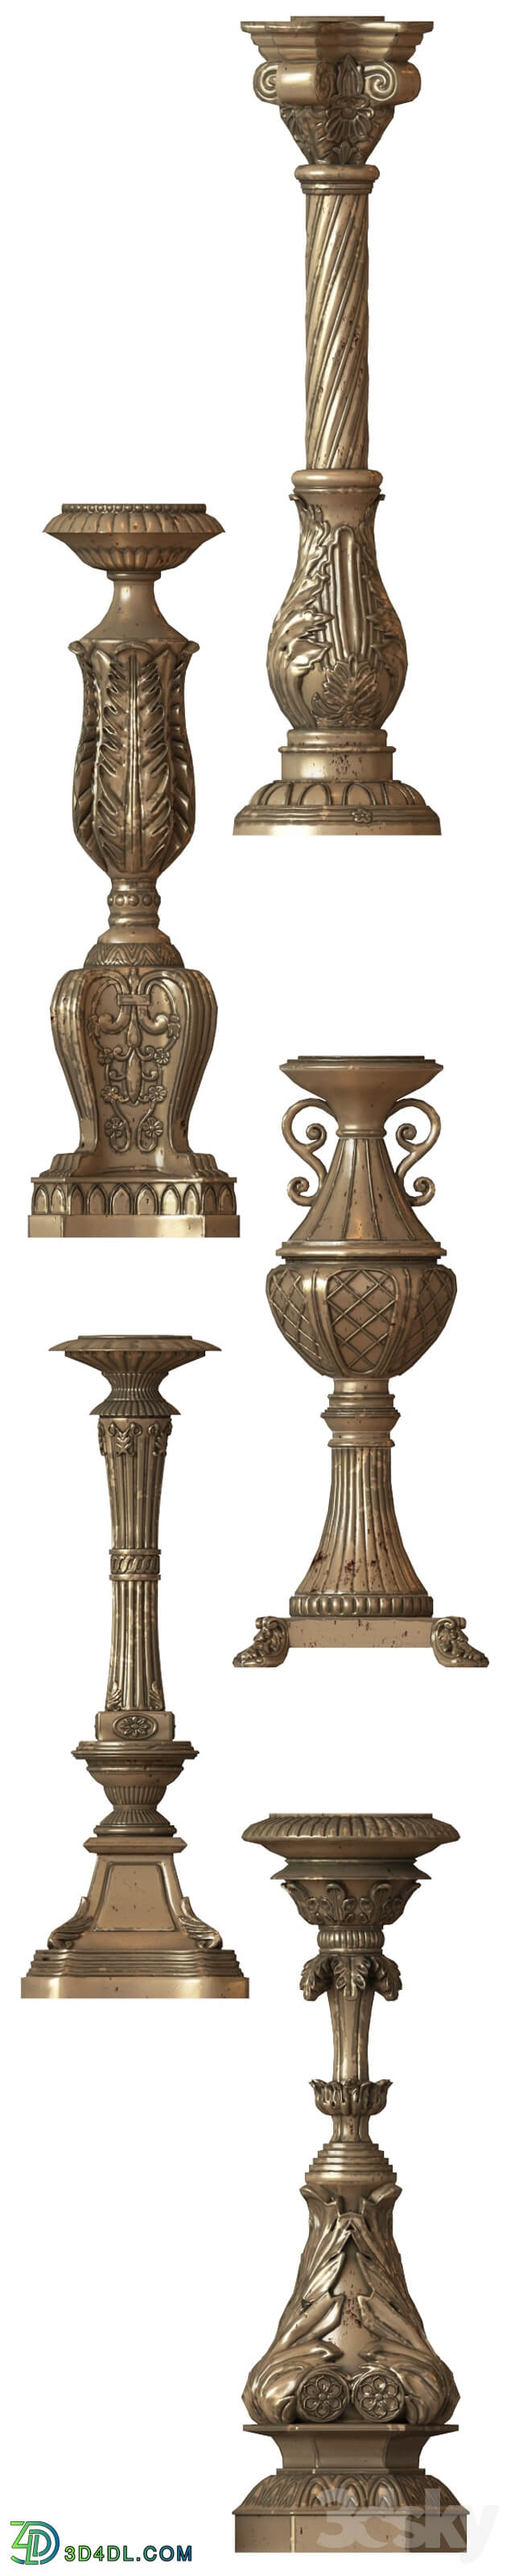 Other decorative objects - Candleholders